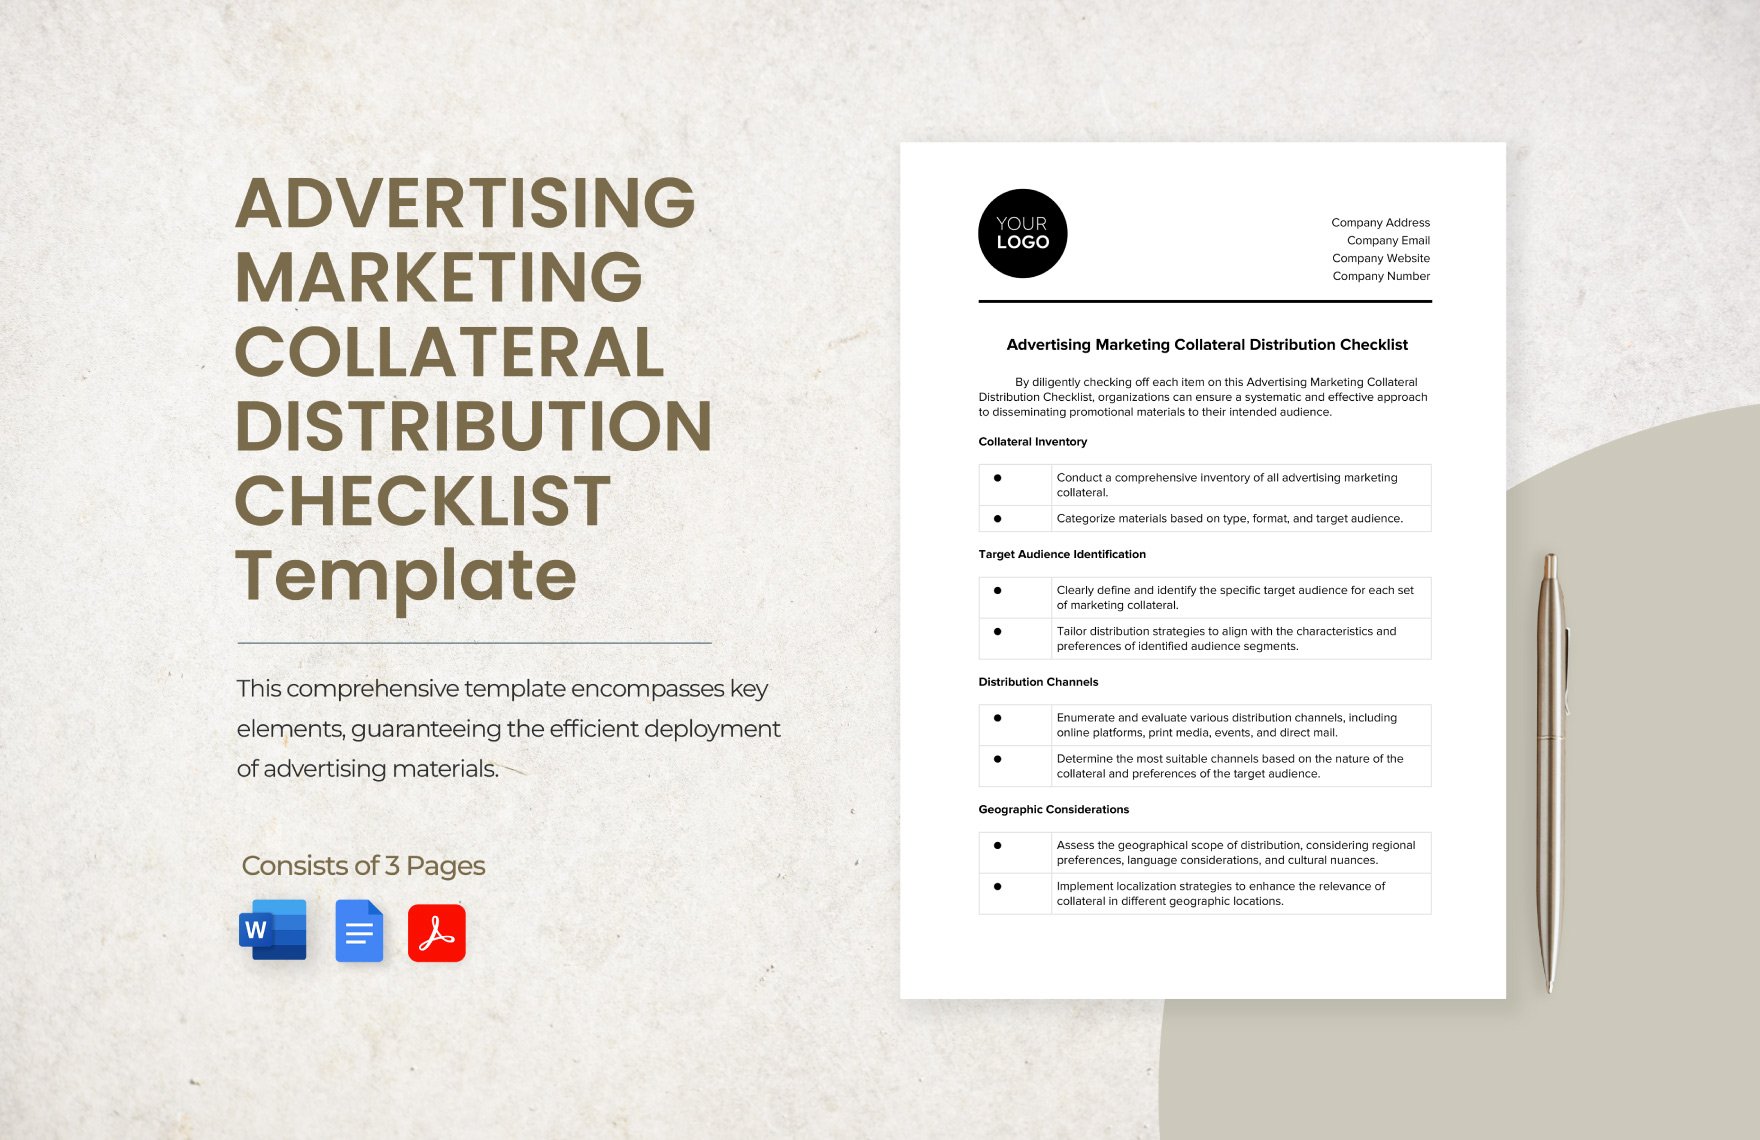 Advertising Marketing Collateral Distribution Checklist Template in Word, Google Docs, PDF